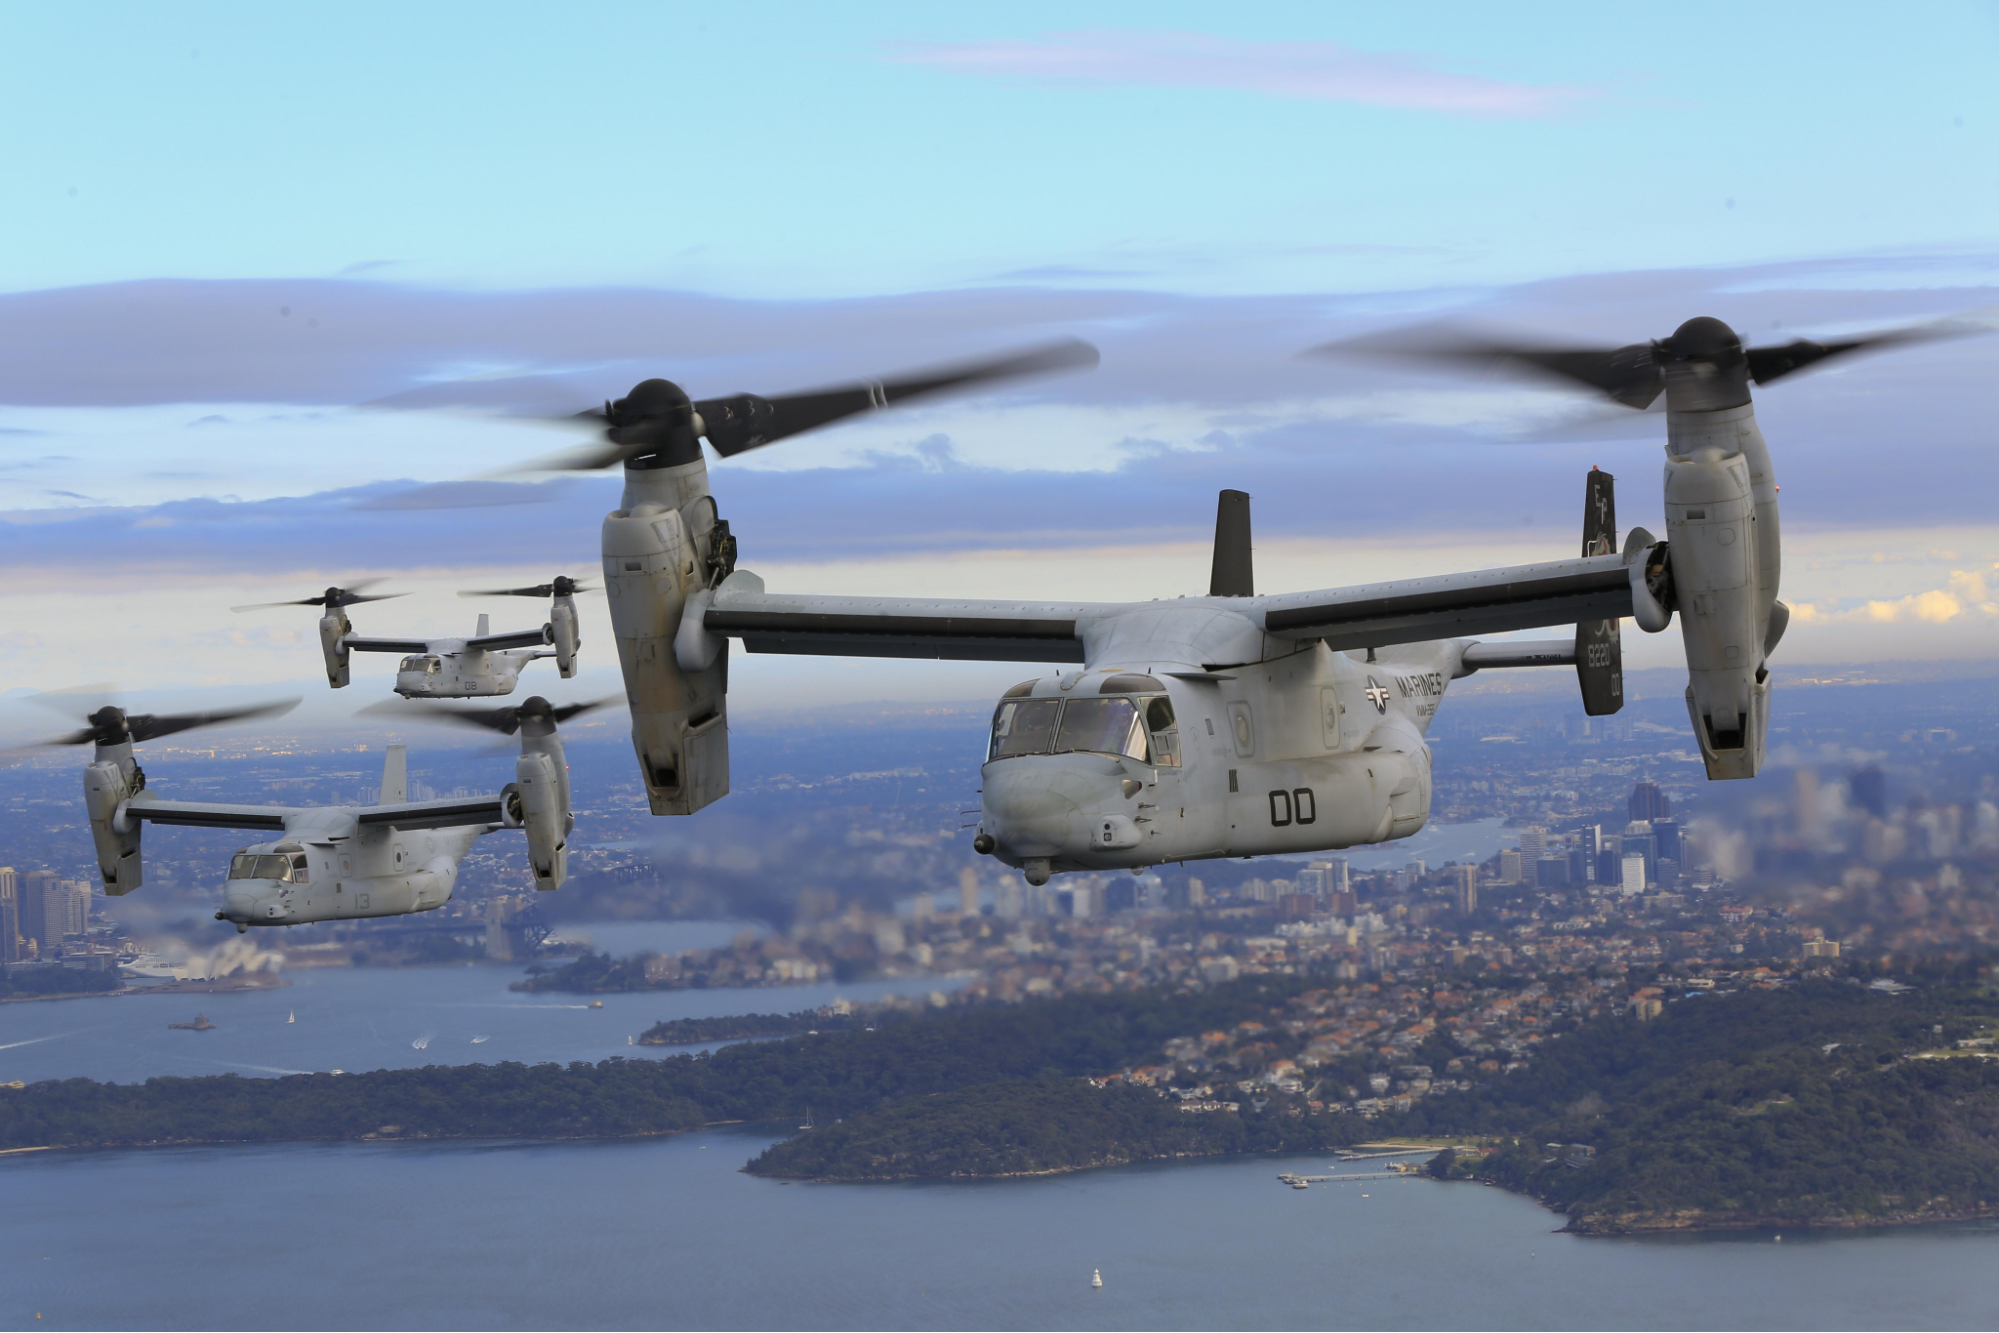 CAMRE Pushes Boundaries with In-Flight 3D Printing for Marines